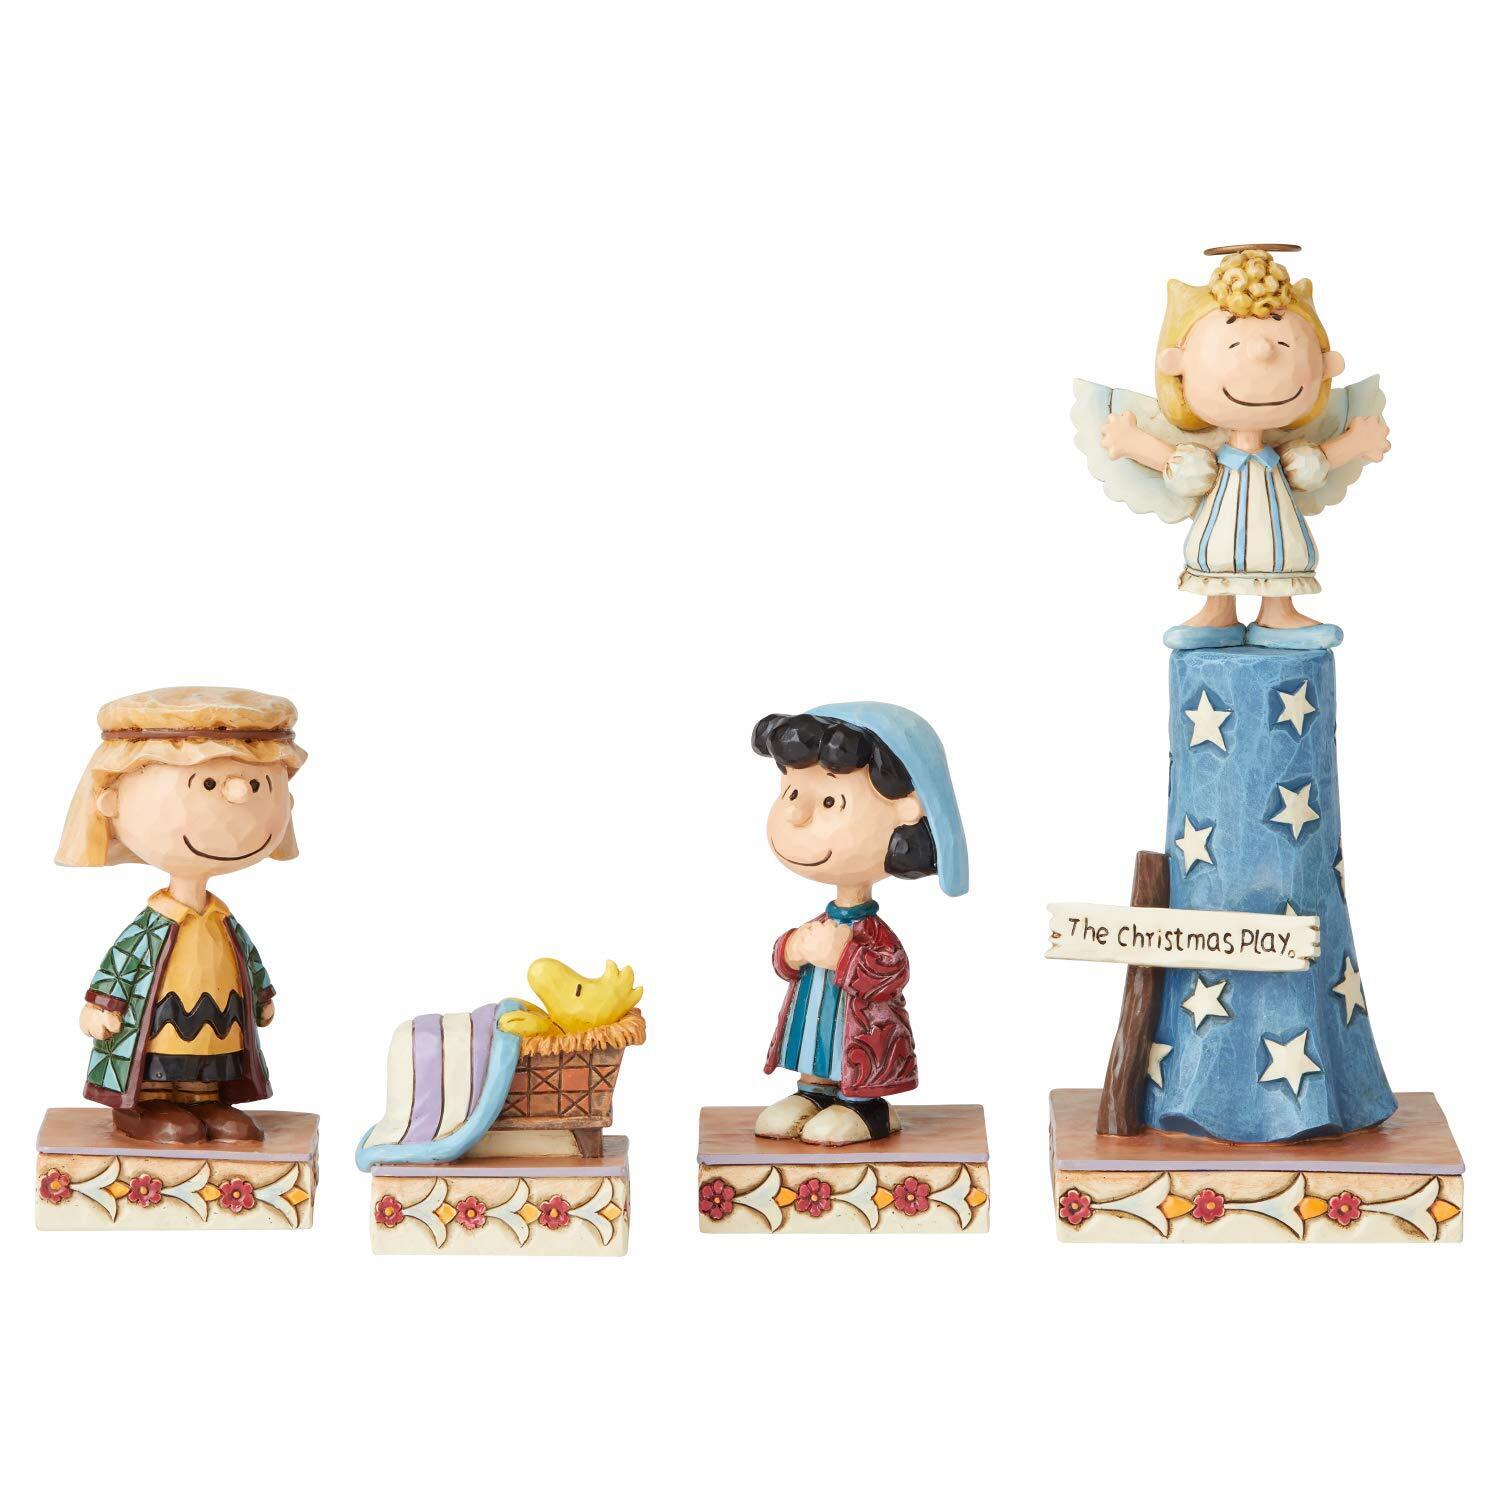 Enesco Peanuts by Jim Shore Christmas Pageant True Meaning Figurine Set, 7.5 Inc